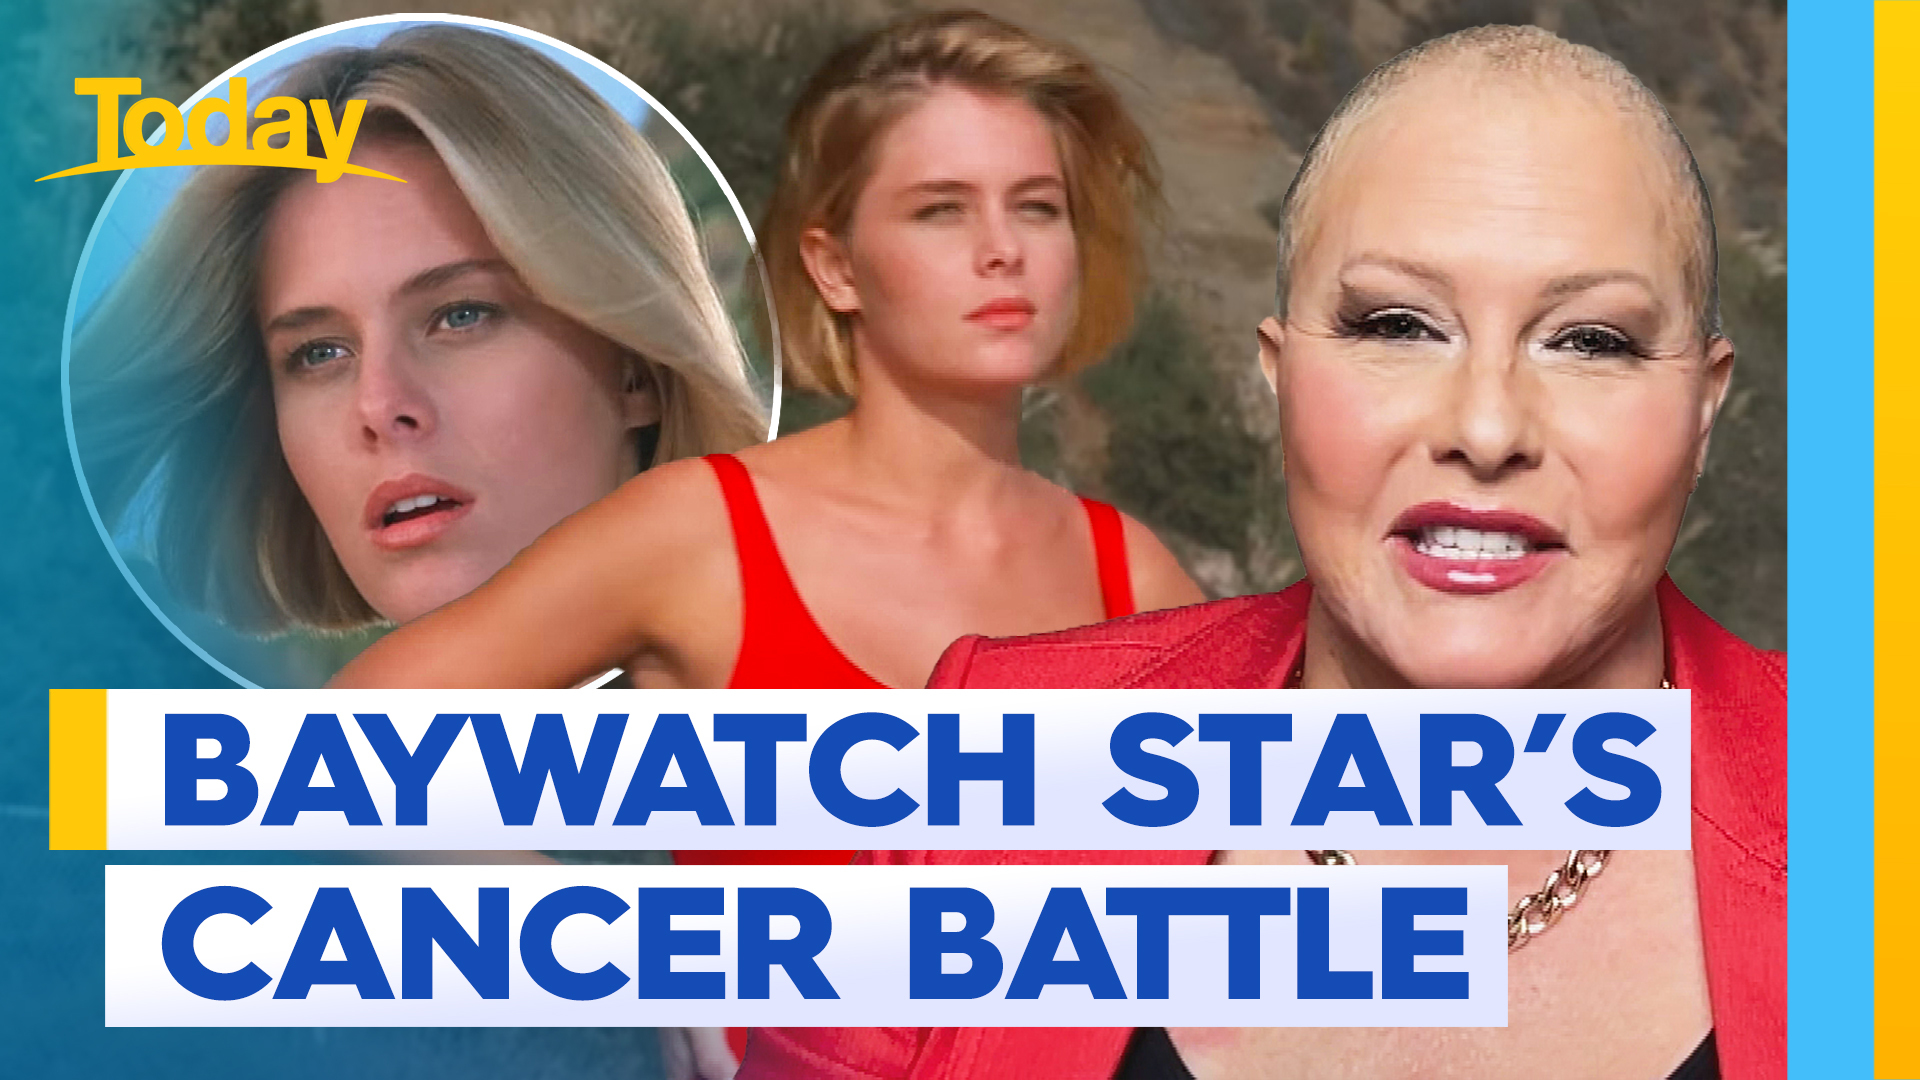 Baywatch star battling breast cancer reflects on Shannen Doherty's passing